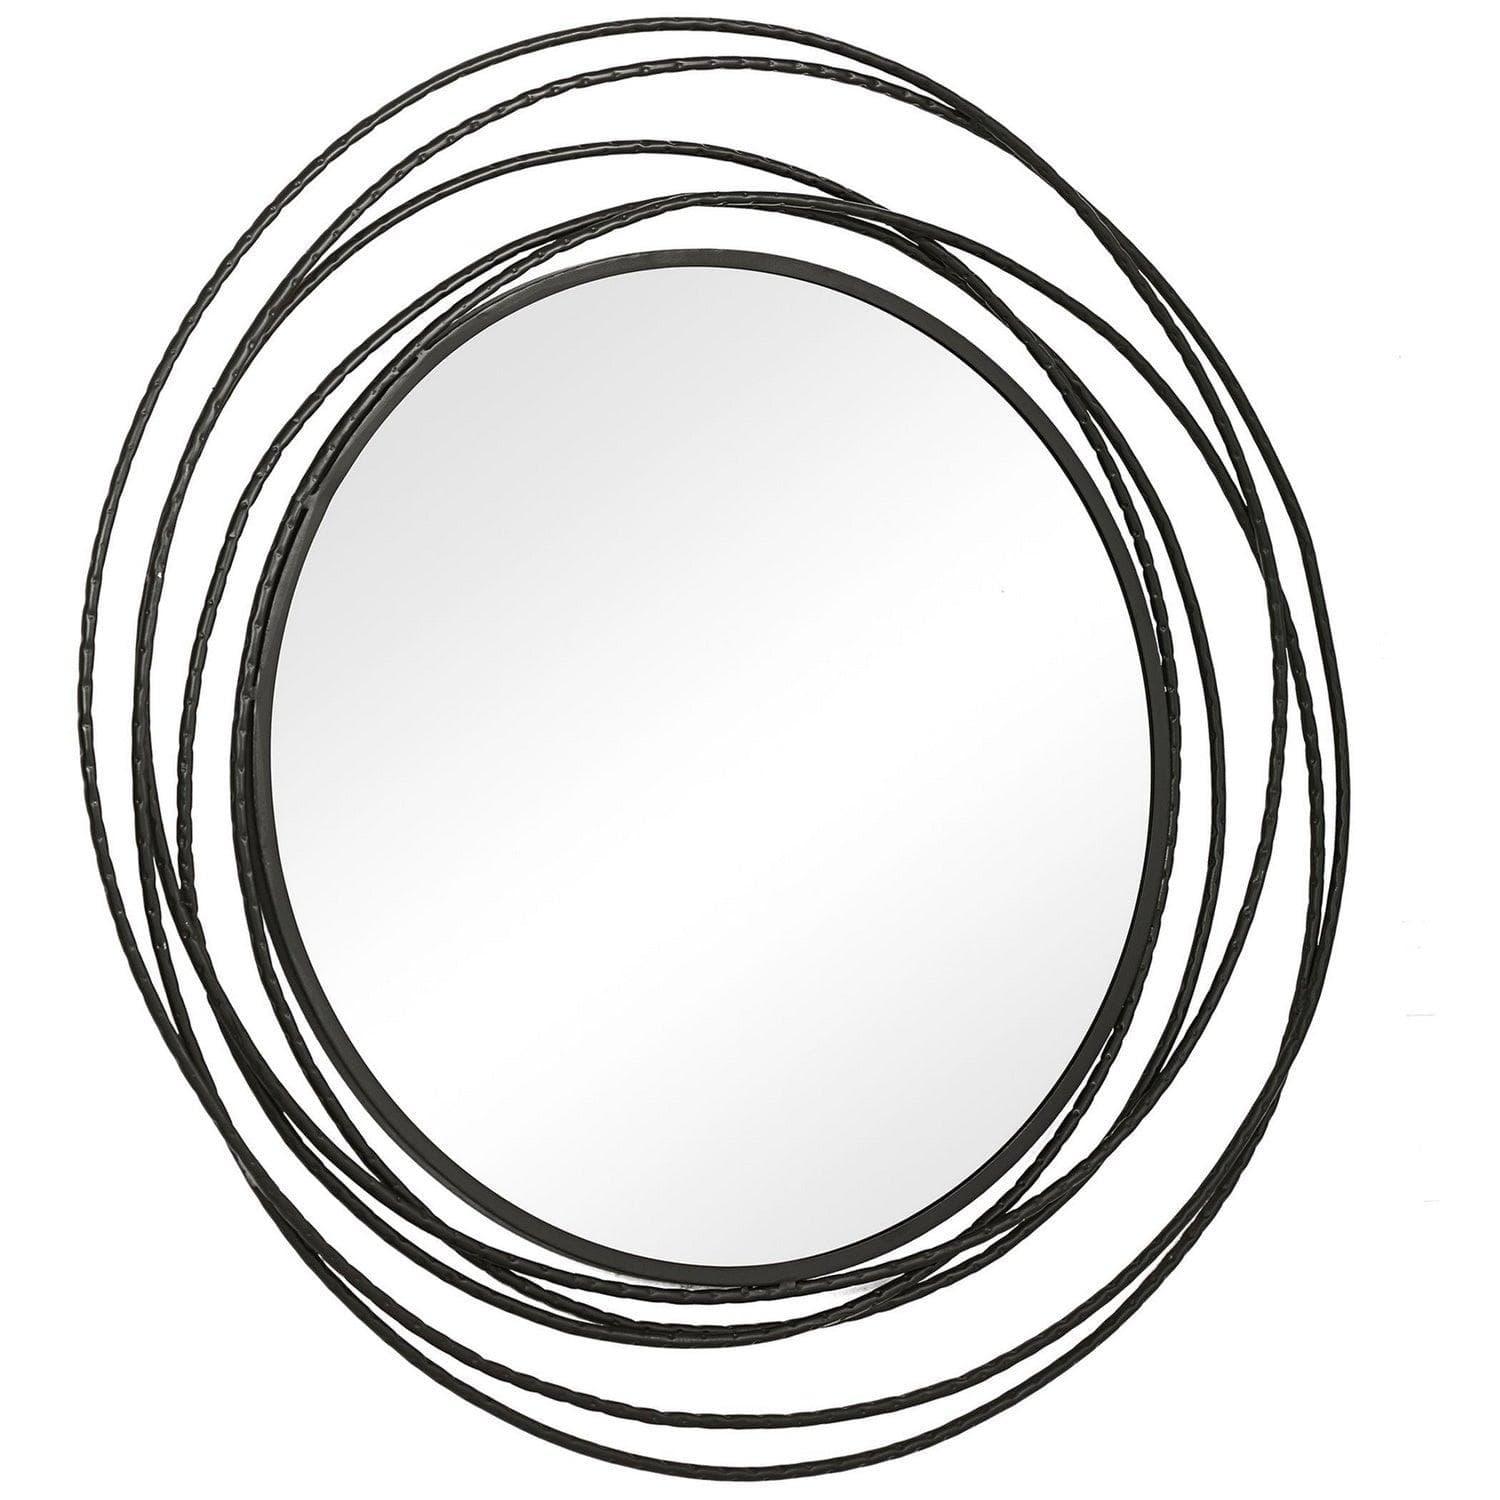 The Uttermost - Whirlwind Mirror - 09704 | Montreal Lighting & Hardware